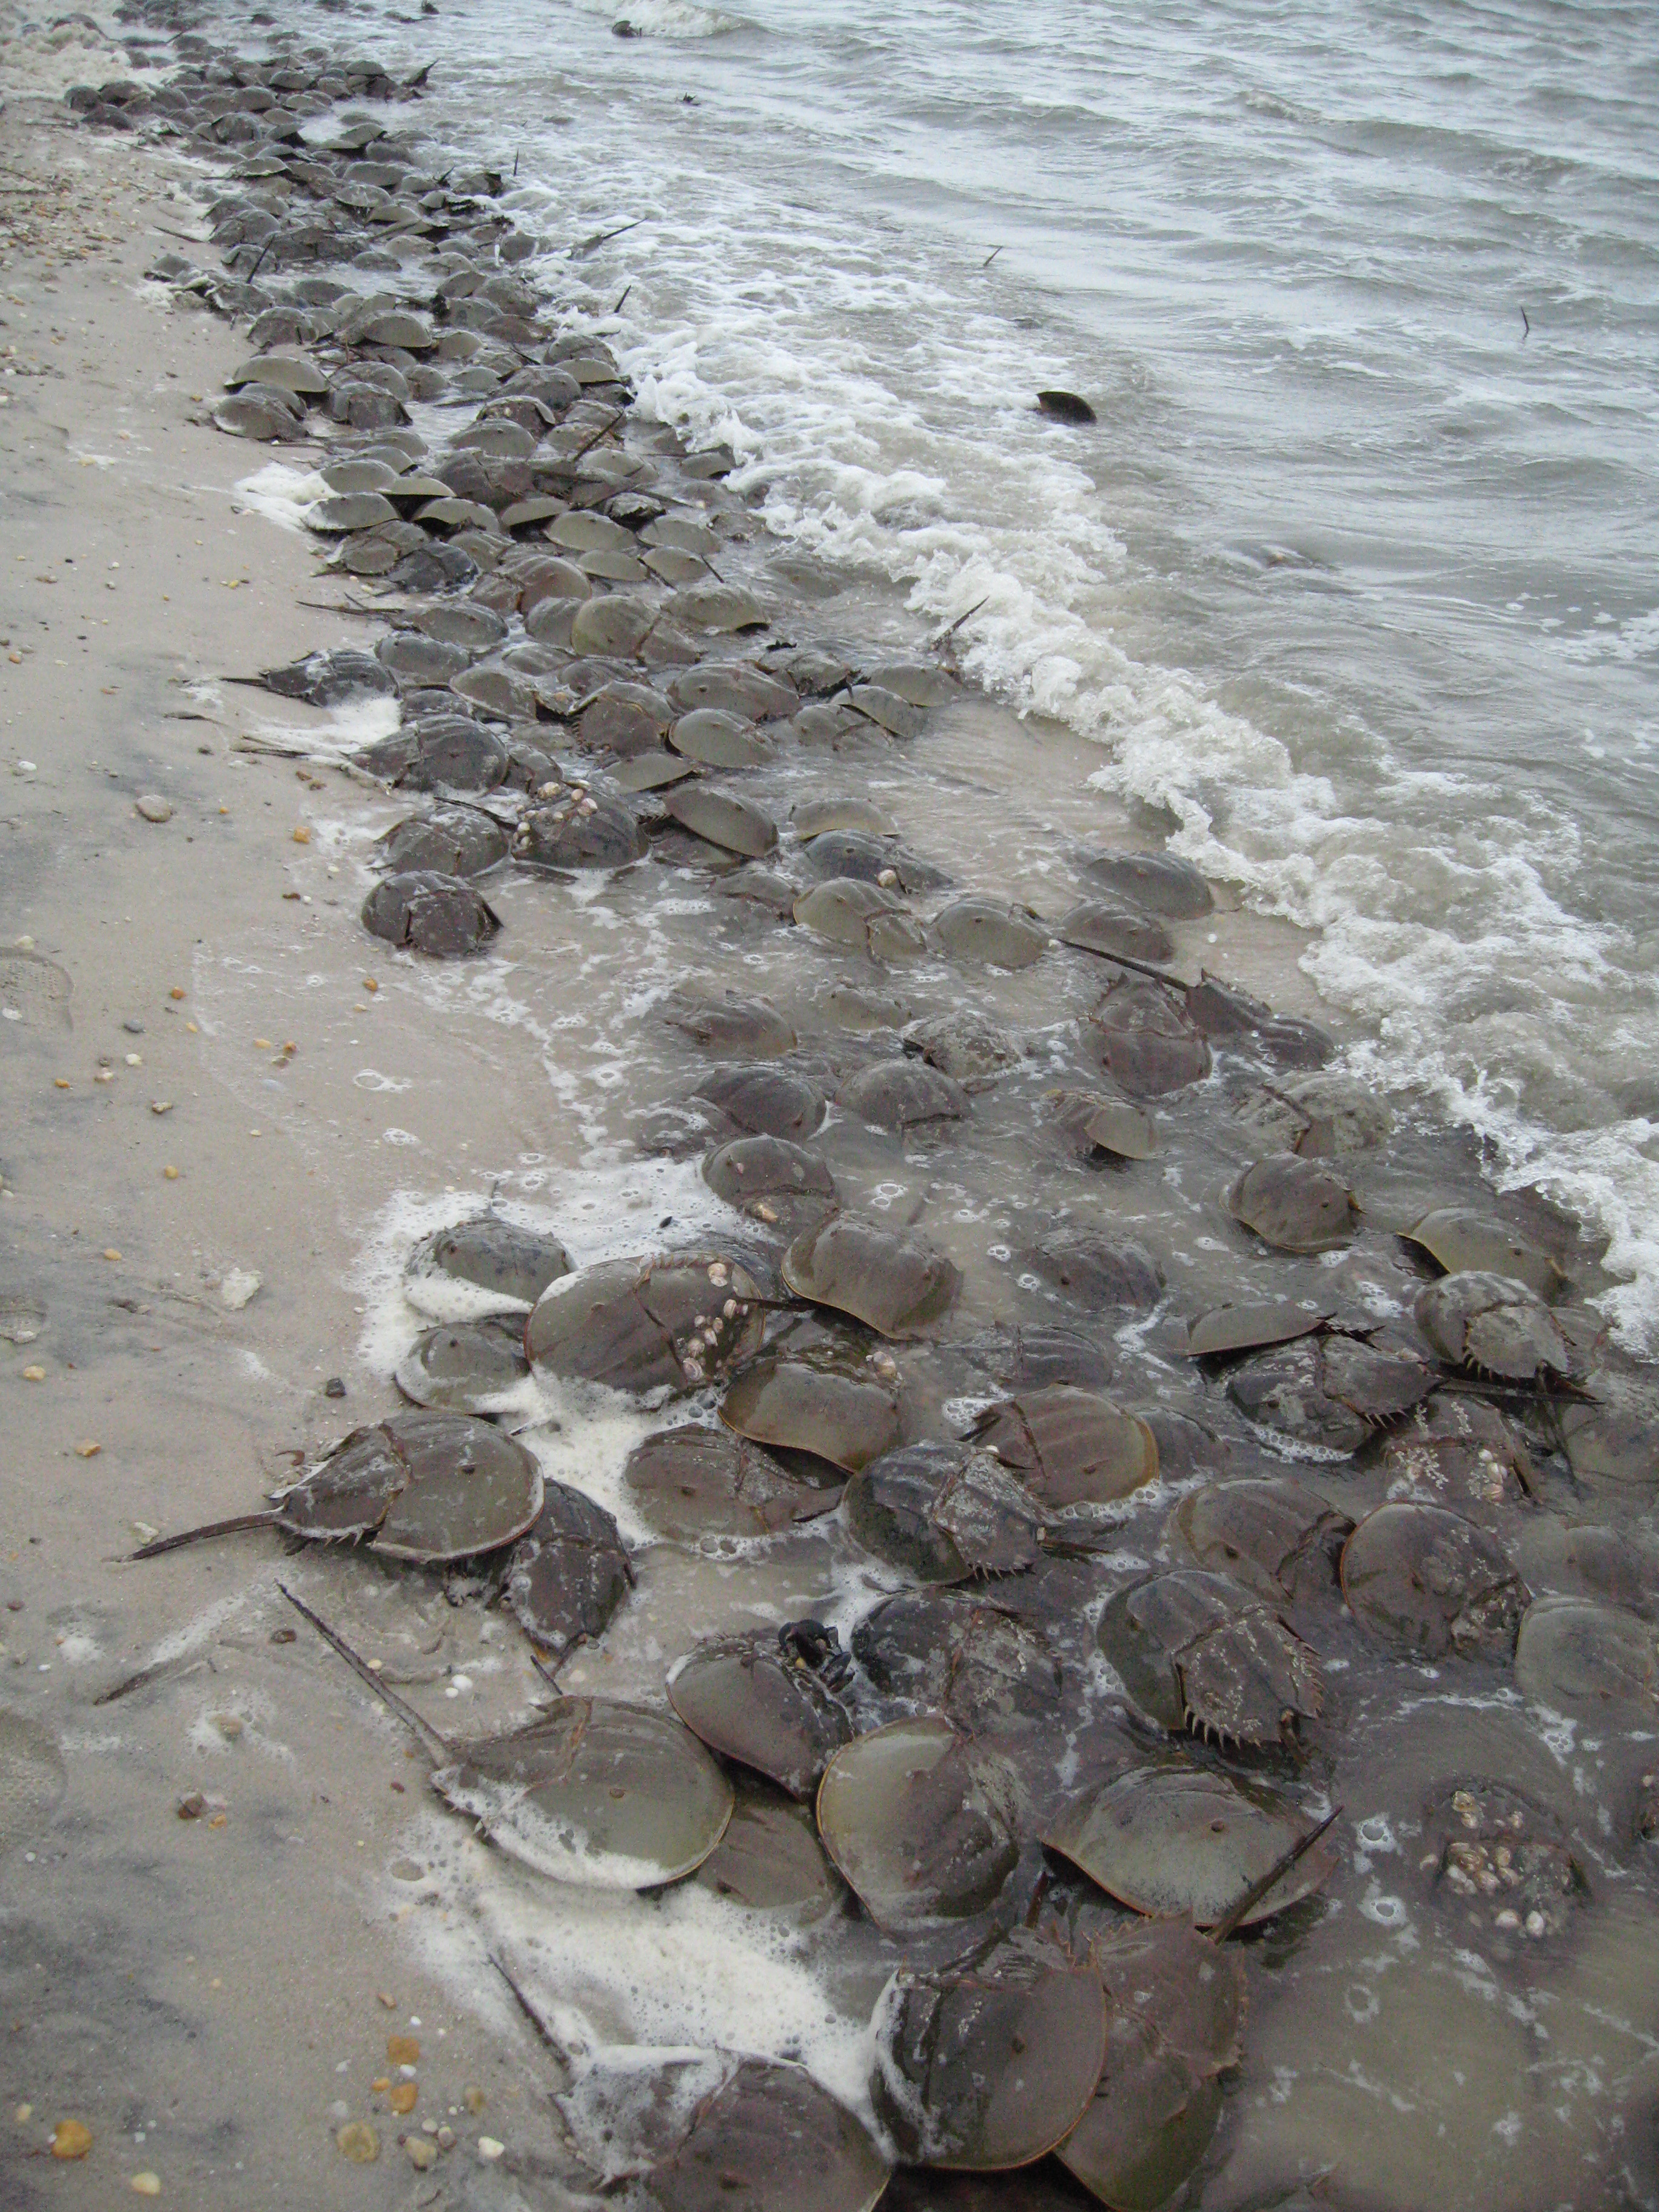 Horseshoe Crab Facts Give Us A Lot to Learn About